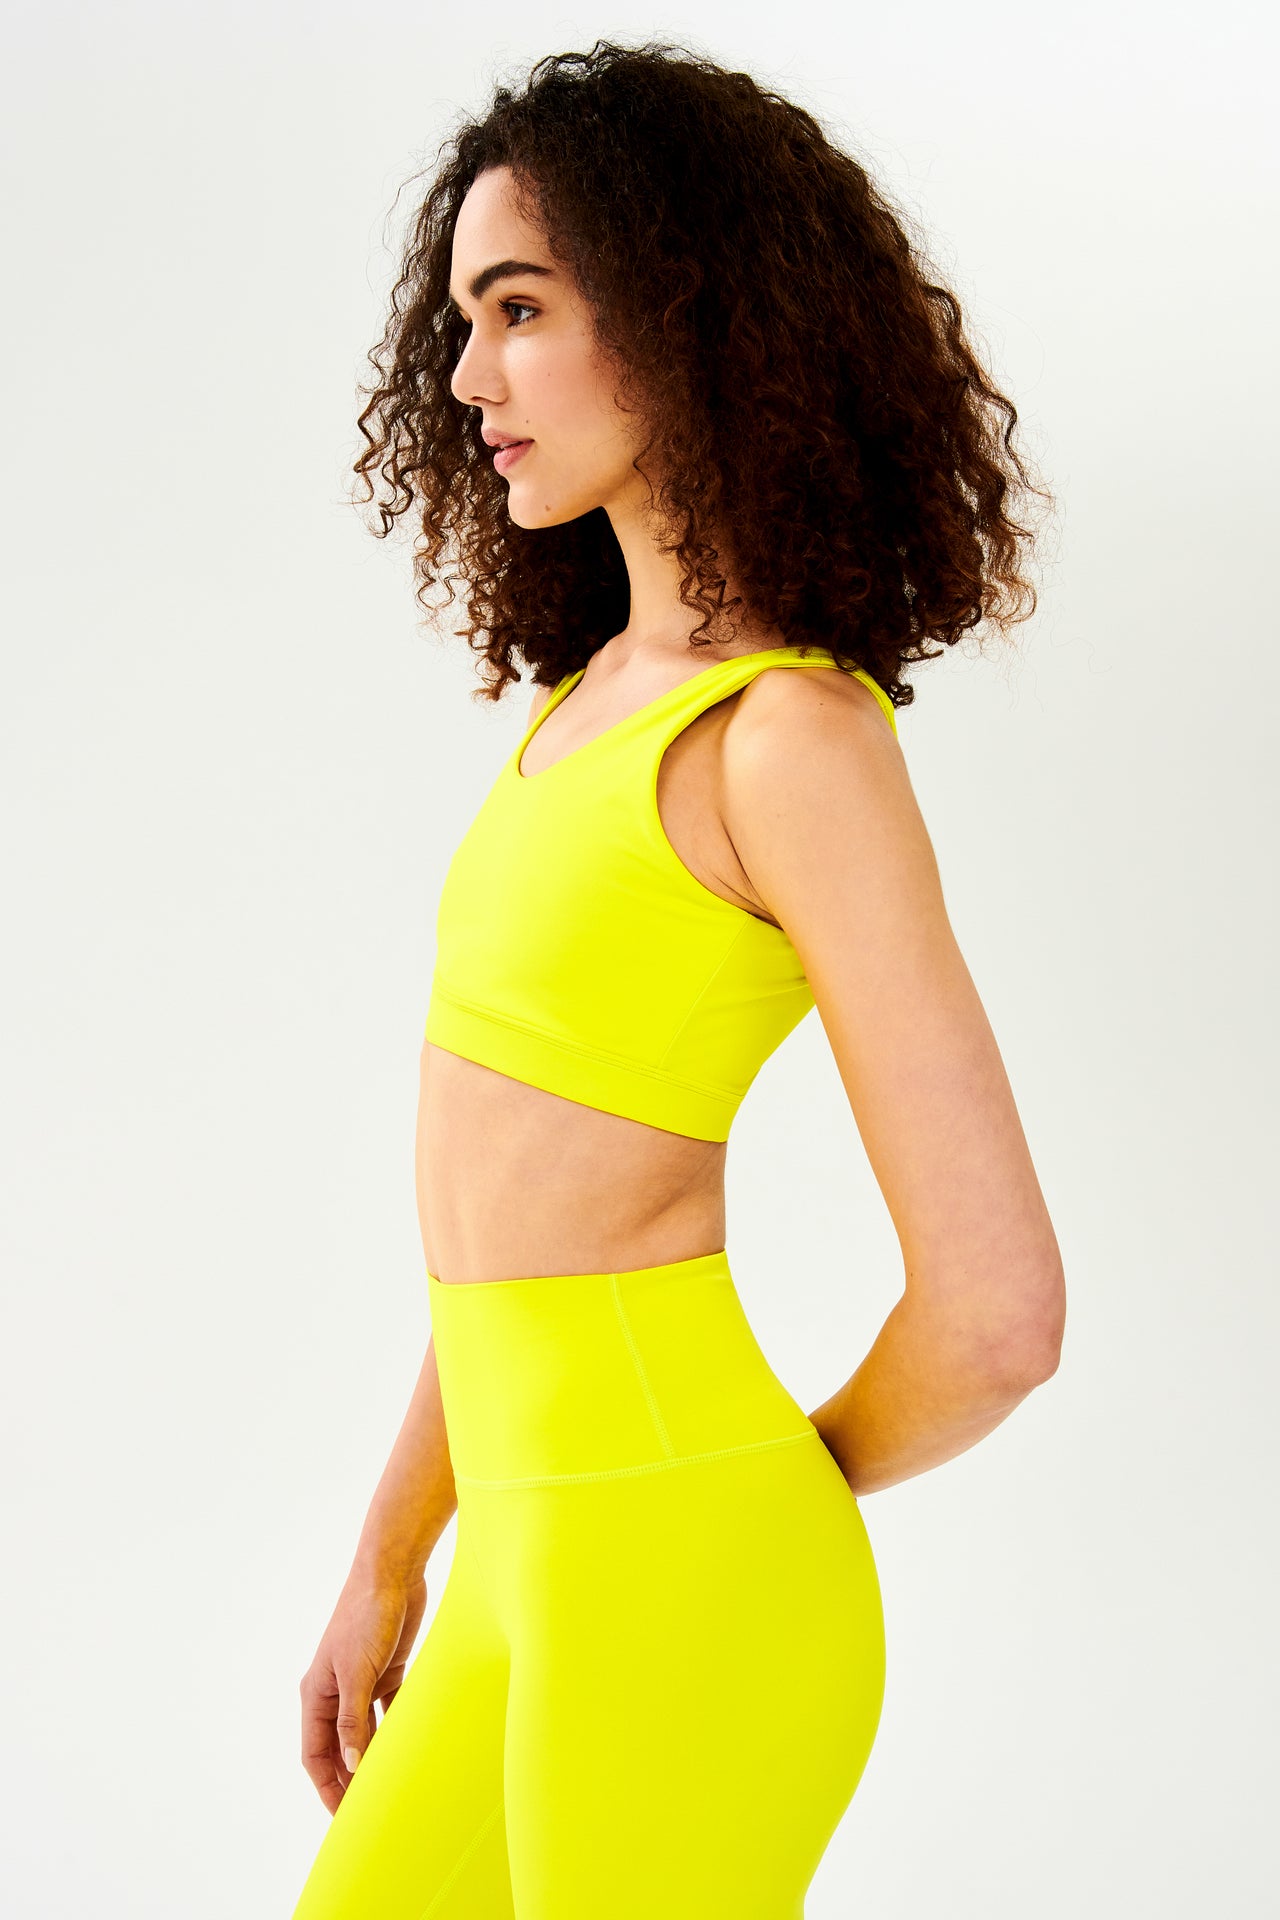 Front side view of woman with curly dark wearing bright yellow bra with bright yellow leggings